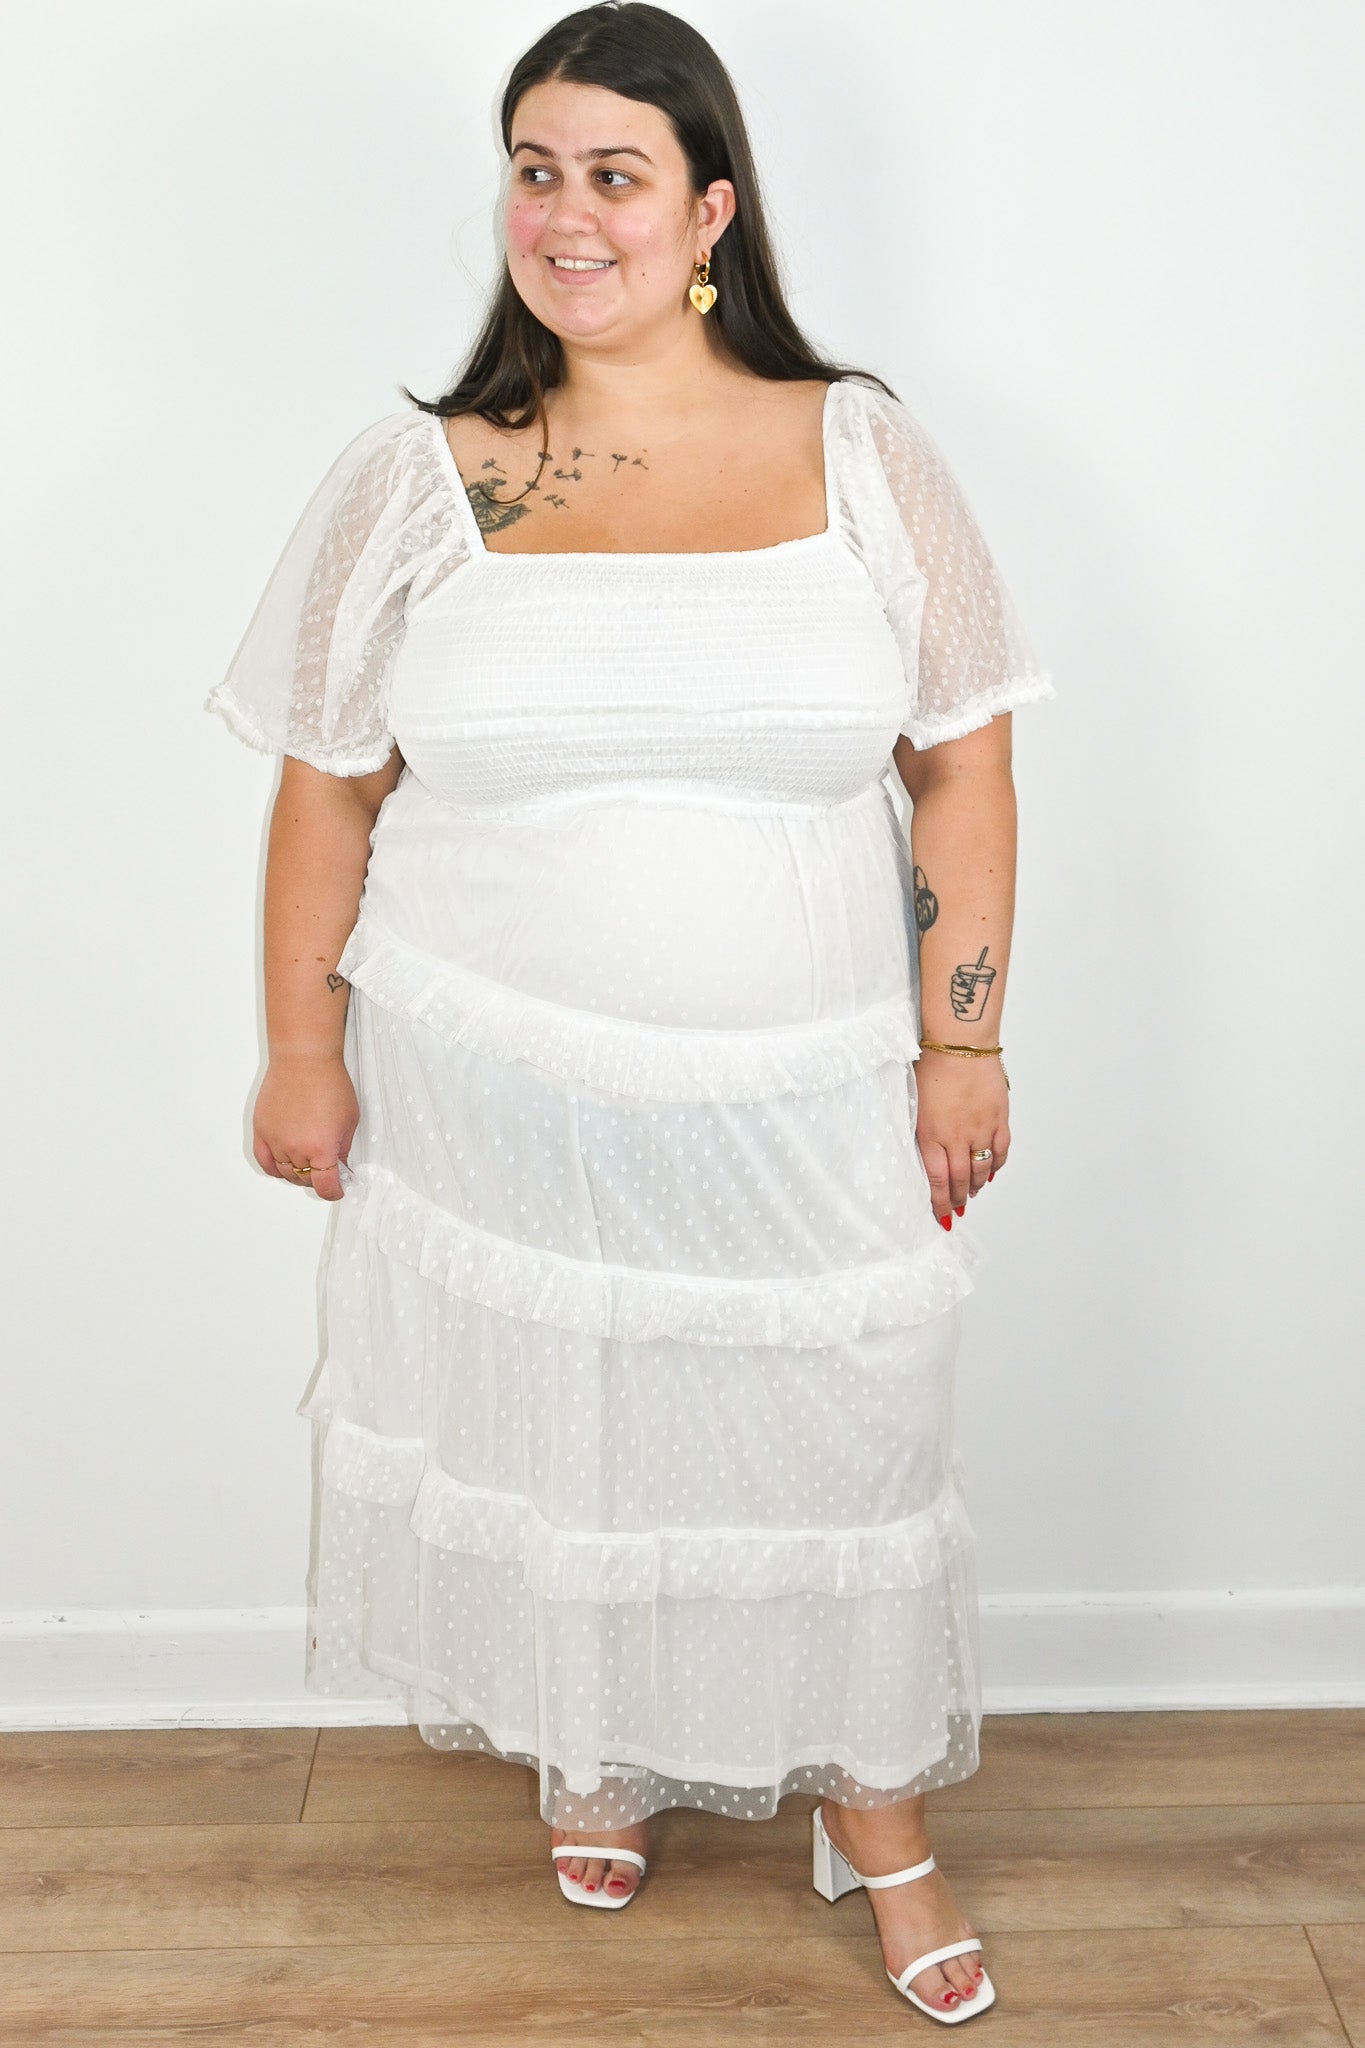 Plus size Romantic white dress for engagement party, bridal shower or rehersal dinner 